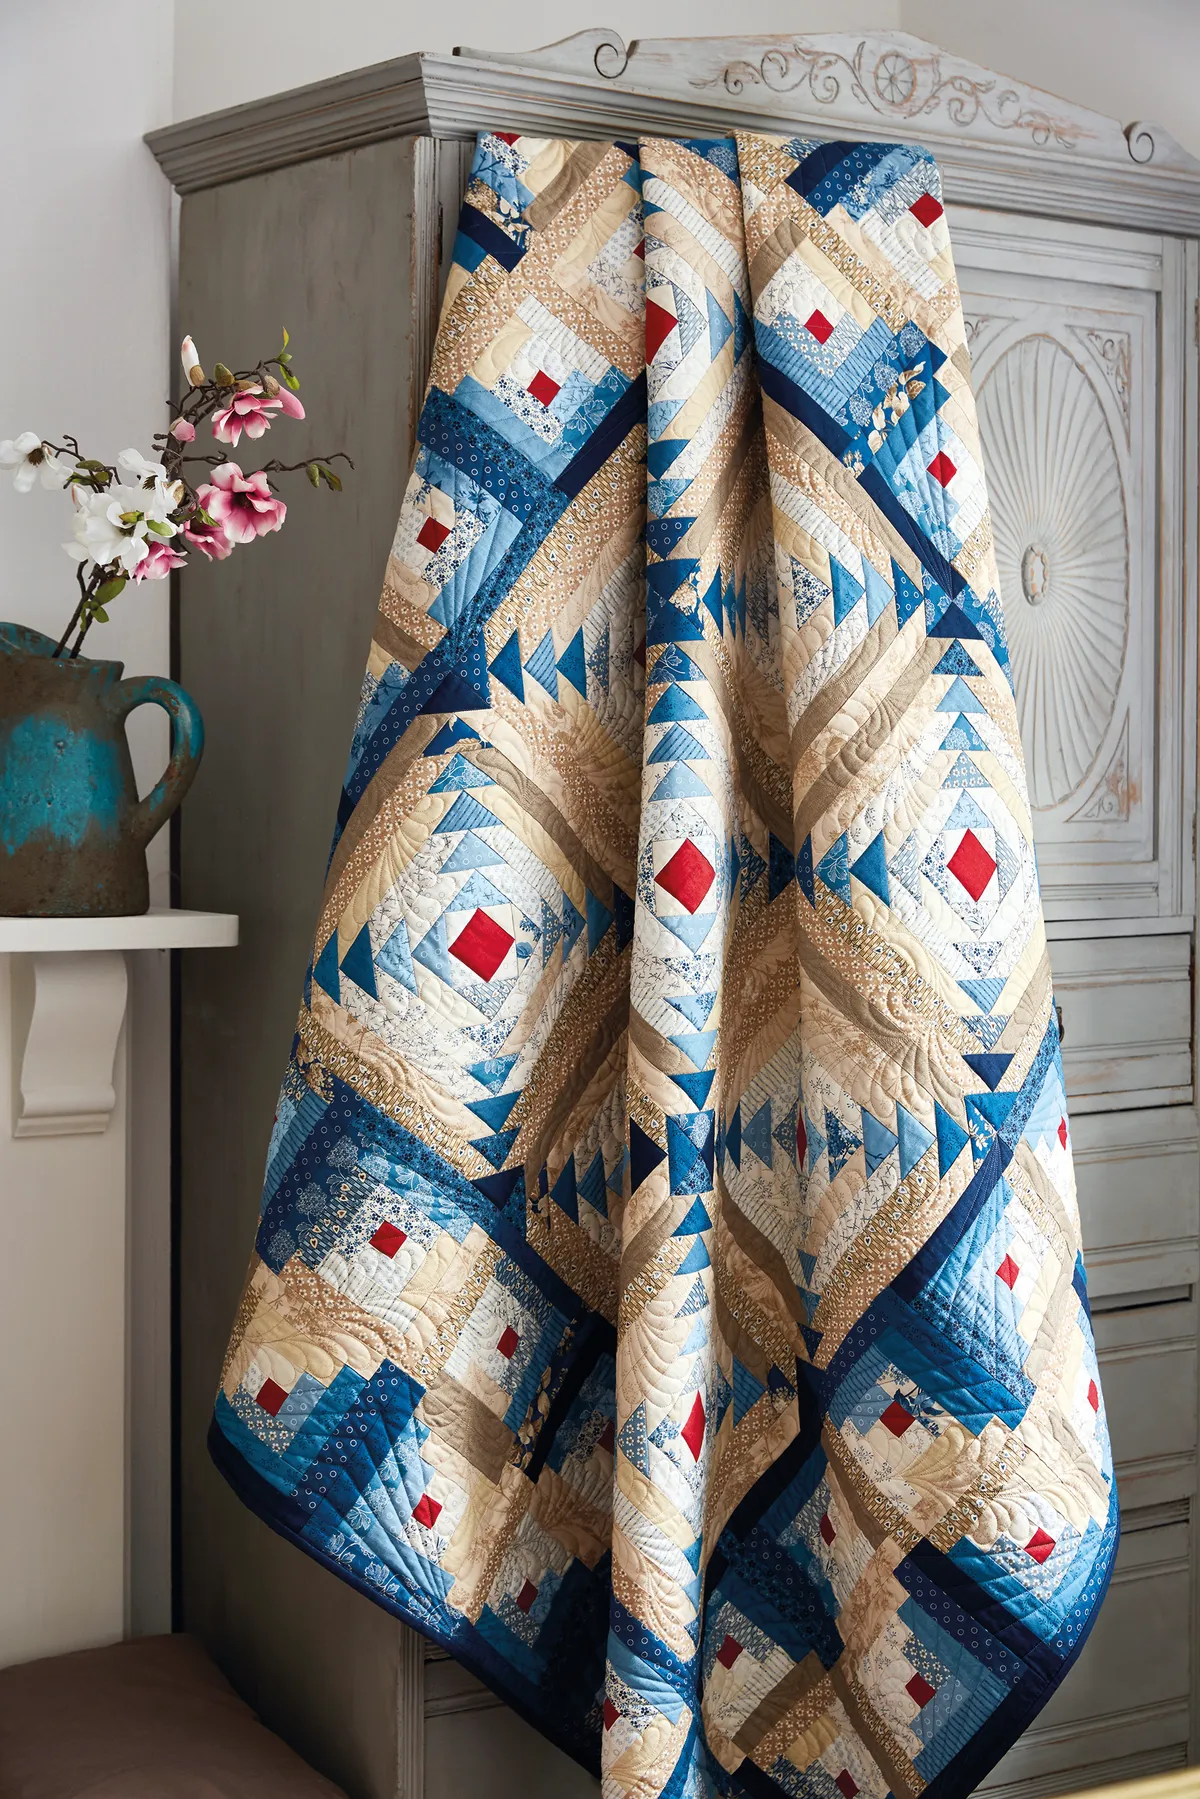 How to foundation piece a log cabin quilt